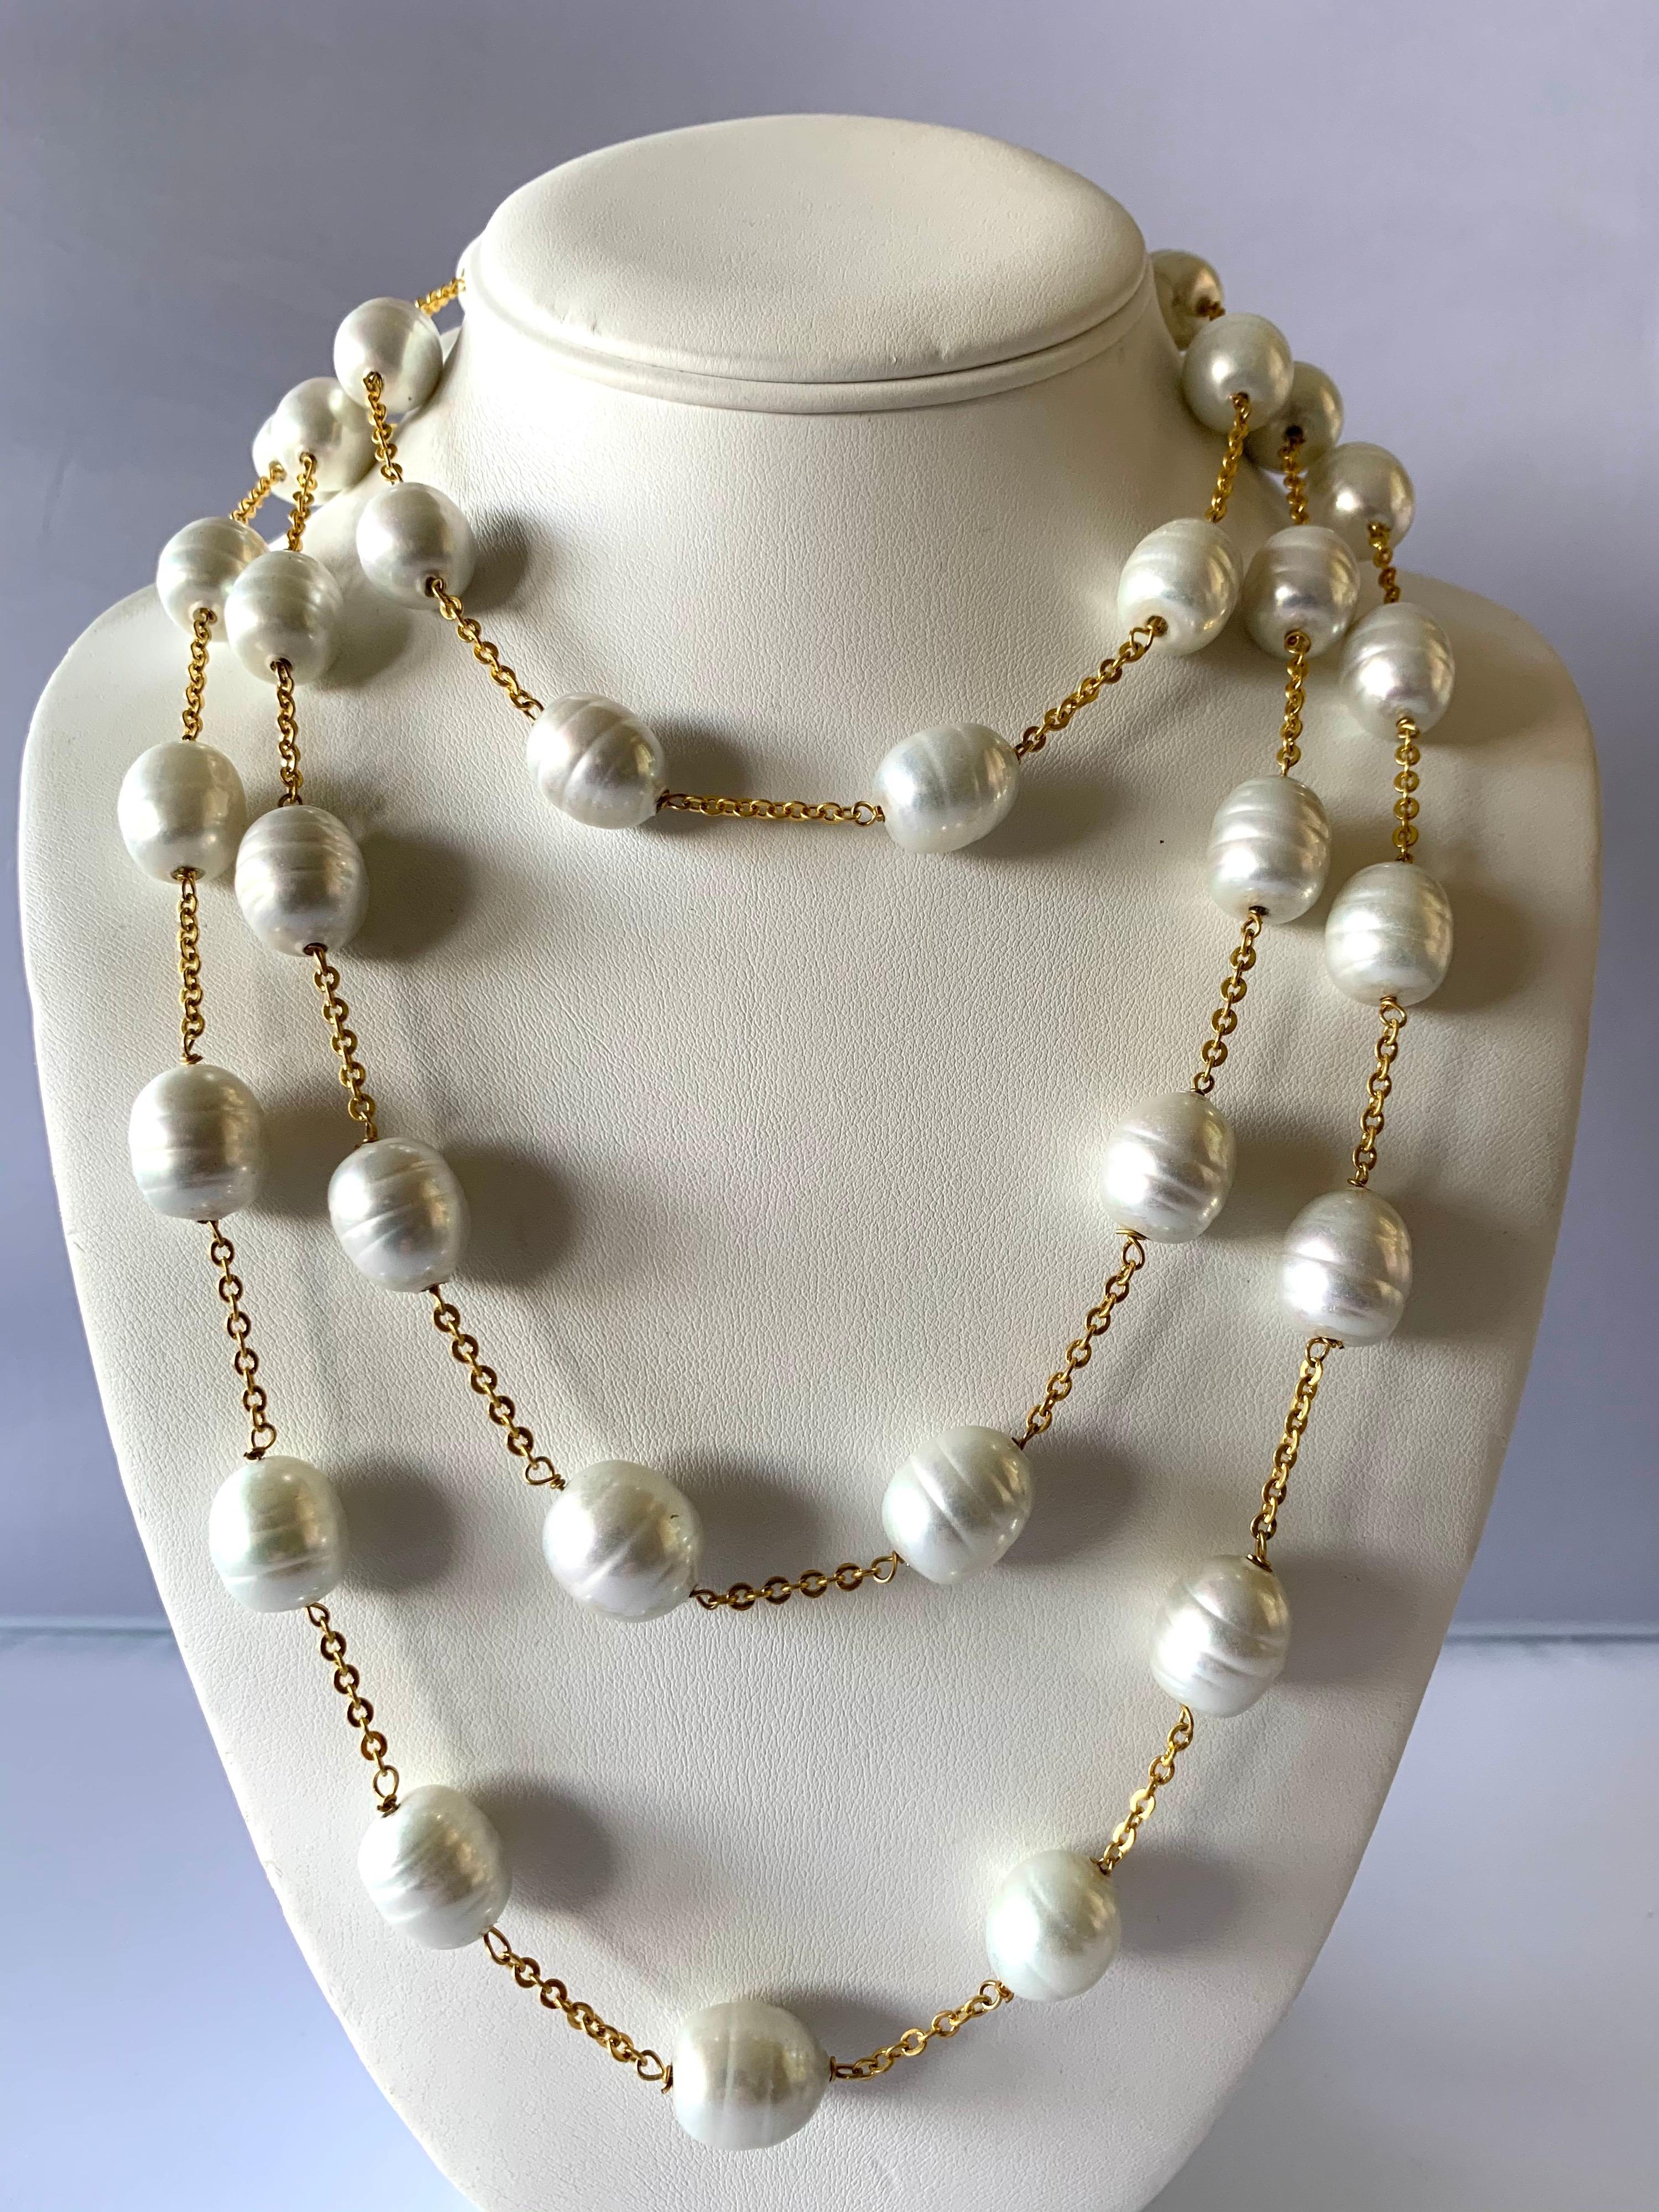 Exquisitely crafted contemporary gold chain and pearl statement necklace - the pearl necklace is comprised out of extra-large cream-colored 